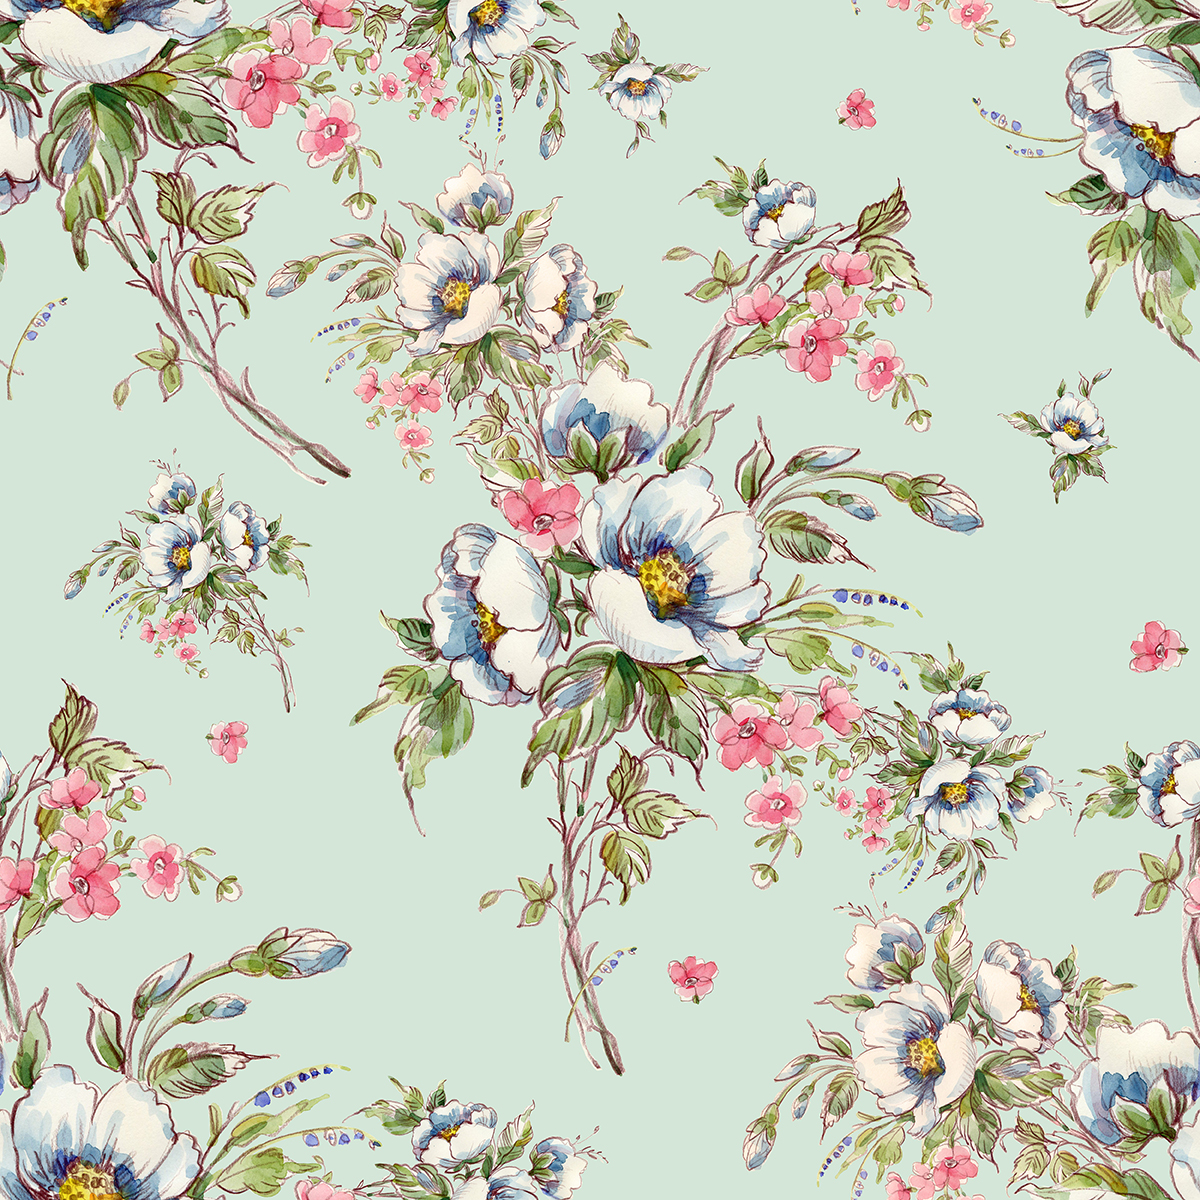 A pattern of flowers on a light blue background